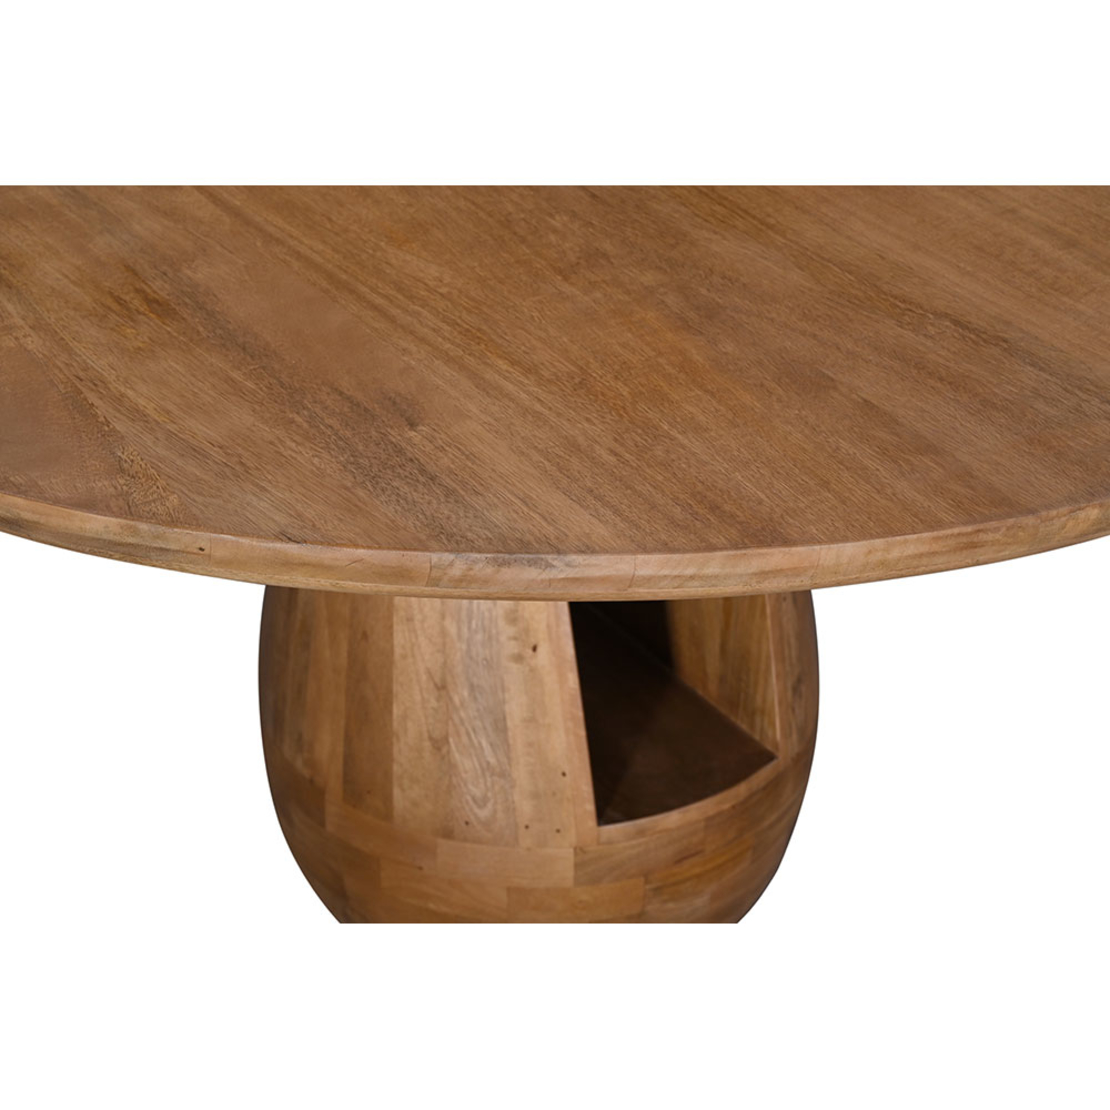 GATE TABLE SOLID WOOD MANGO NATURAL IN